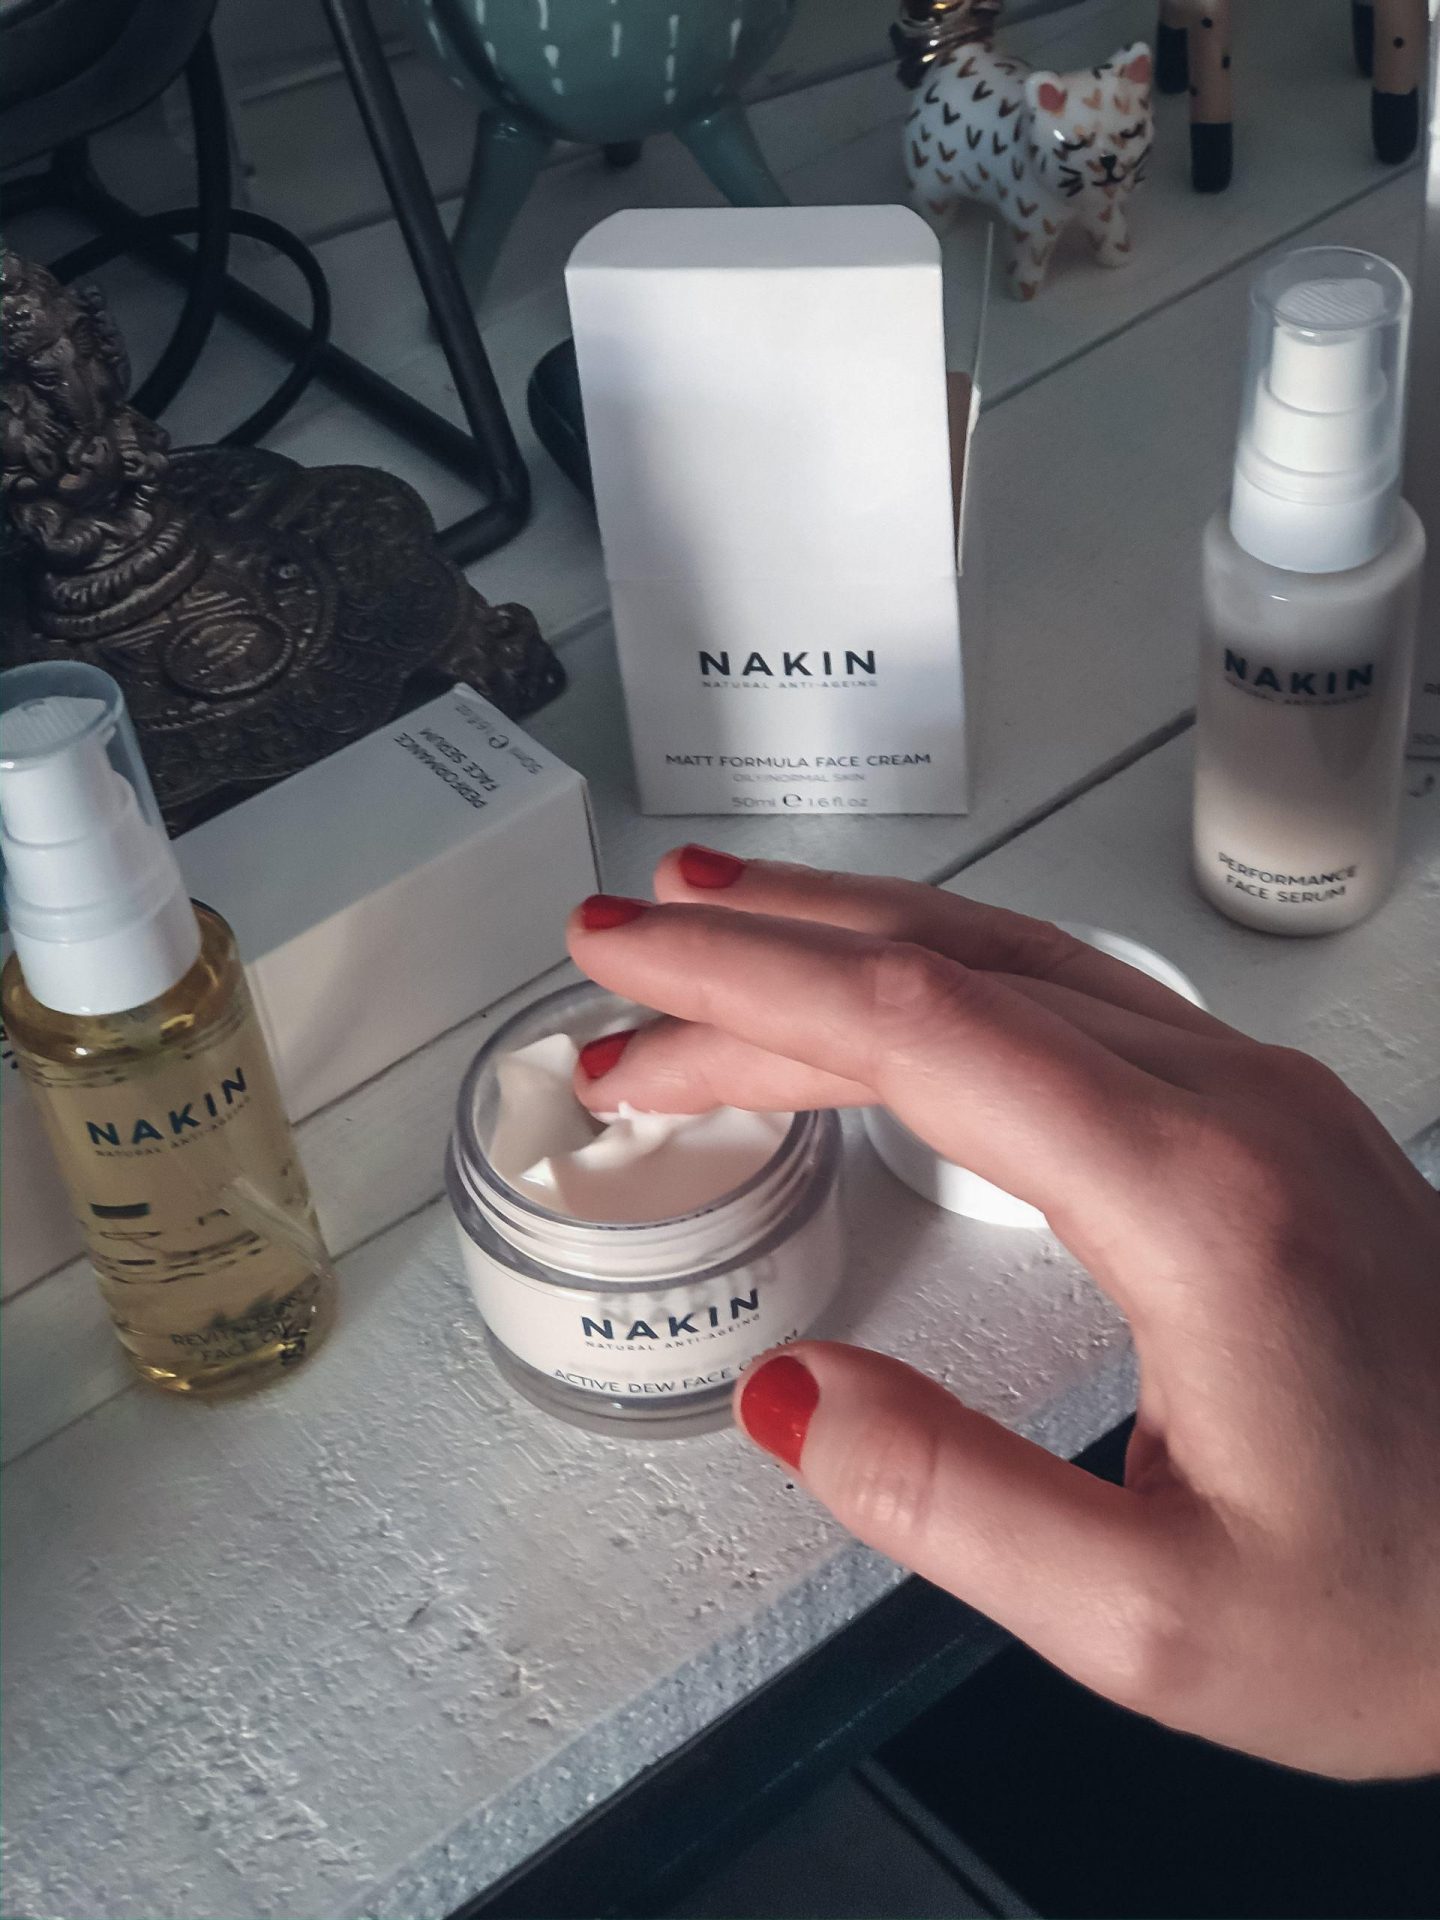 luxurious products from Nakin